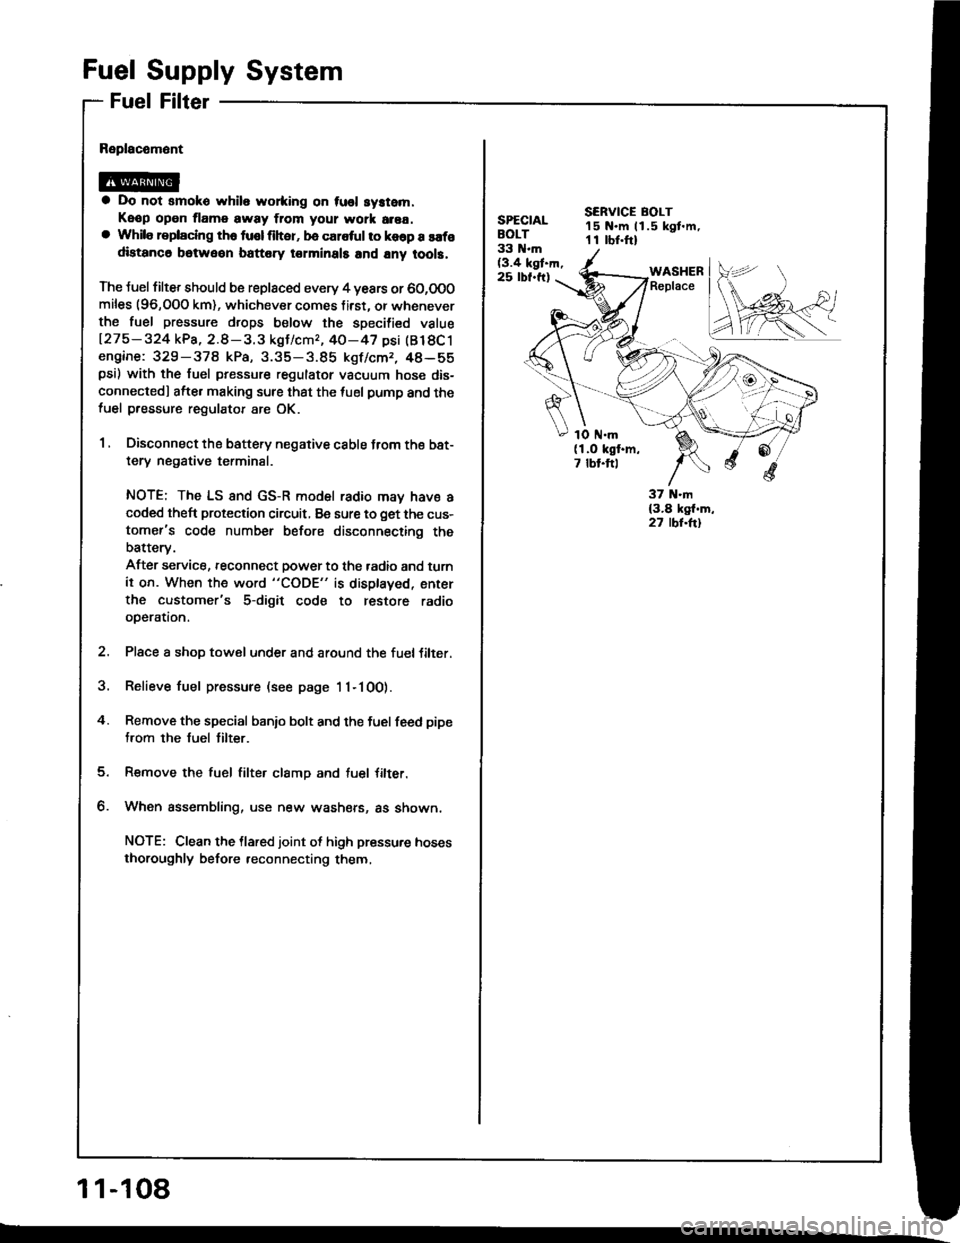 HONDA INTEGRA 1994 4.G User Guide Filter
Fuel Supply System
Fuel
a Do not smoko while wo*ing on tusl system.
Keop open tlame away ftom your wotk area.a While replaclng th6 tusl liher, be caletul to koop a safodistanc6 betweon battery 